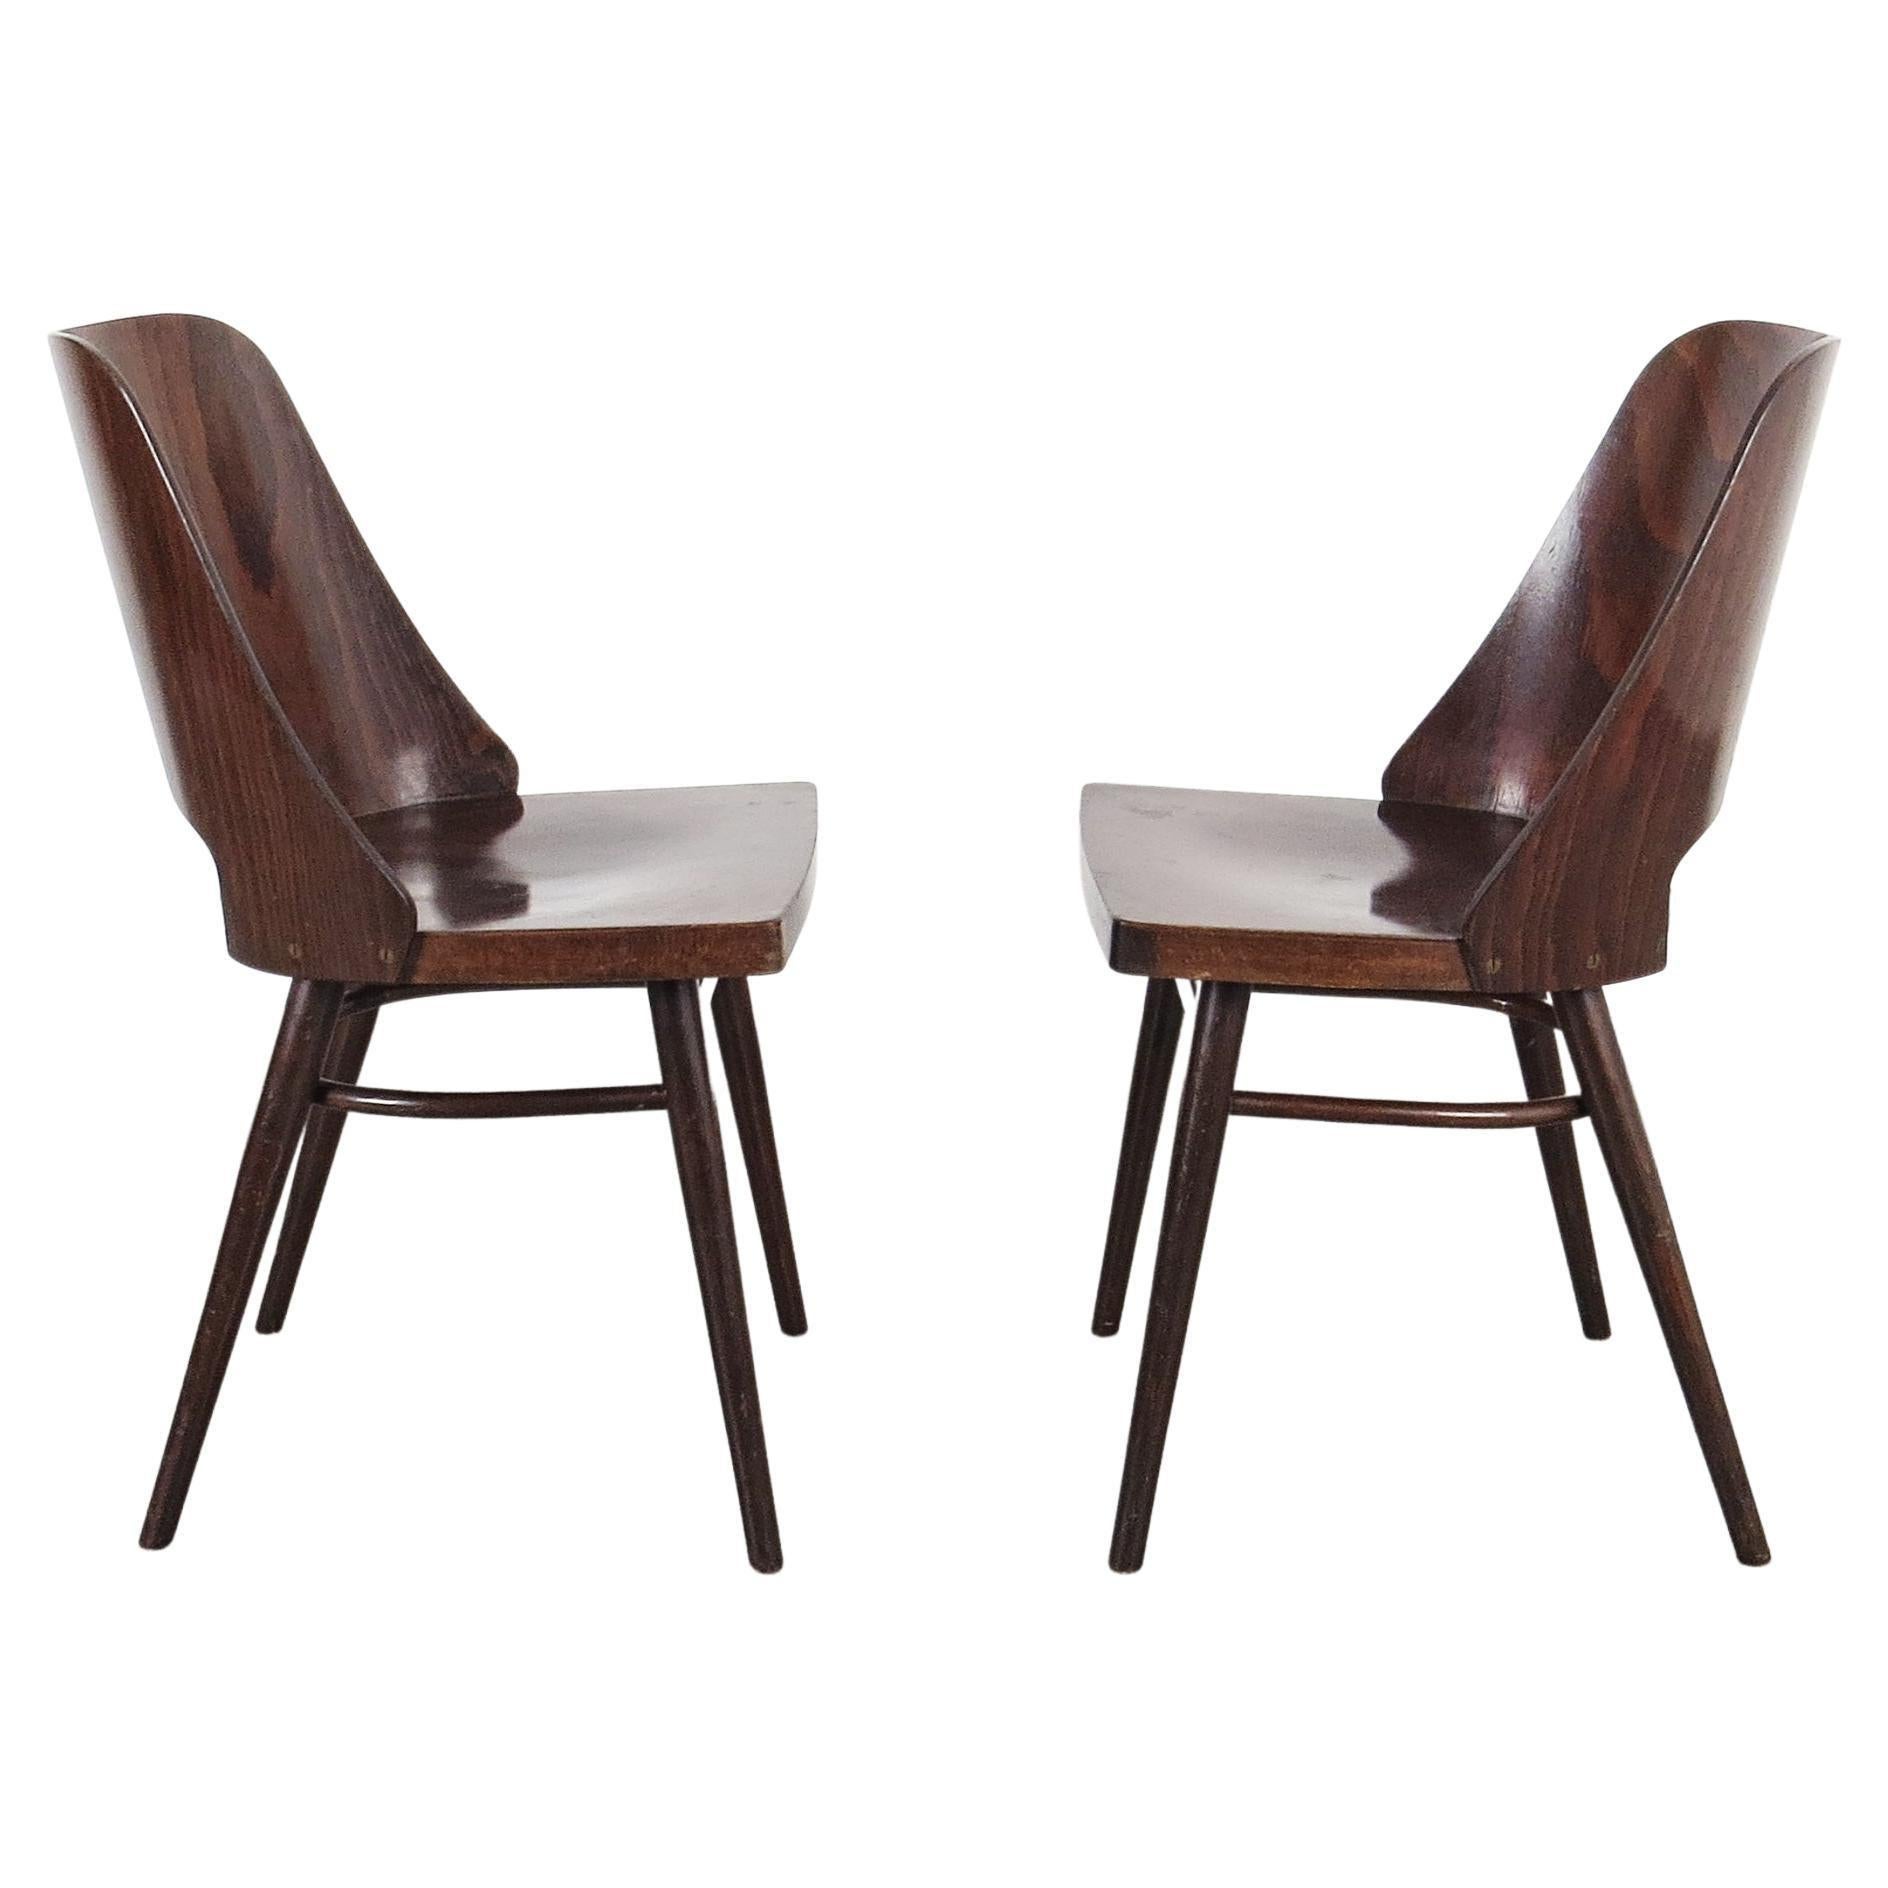 Czechoslovakian Mid-Century Modern manufactured by Ton. The chair pair dates from the 1960s.
 